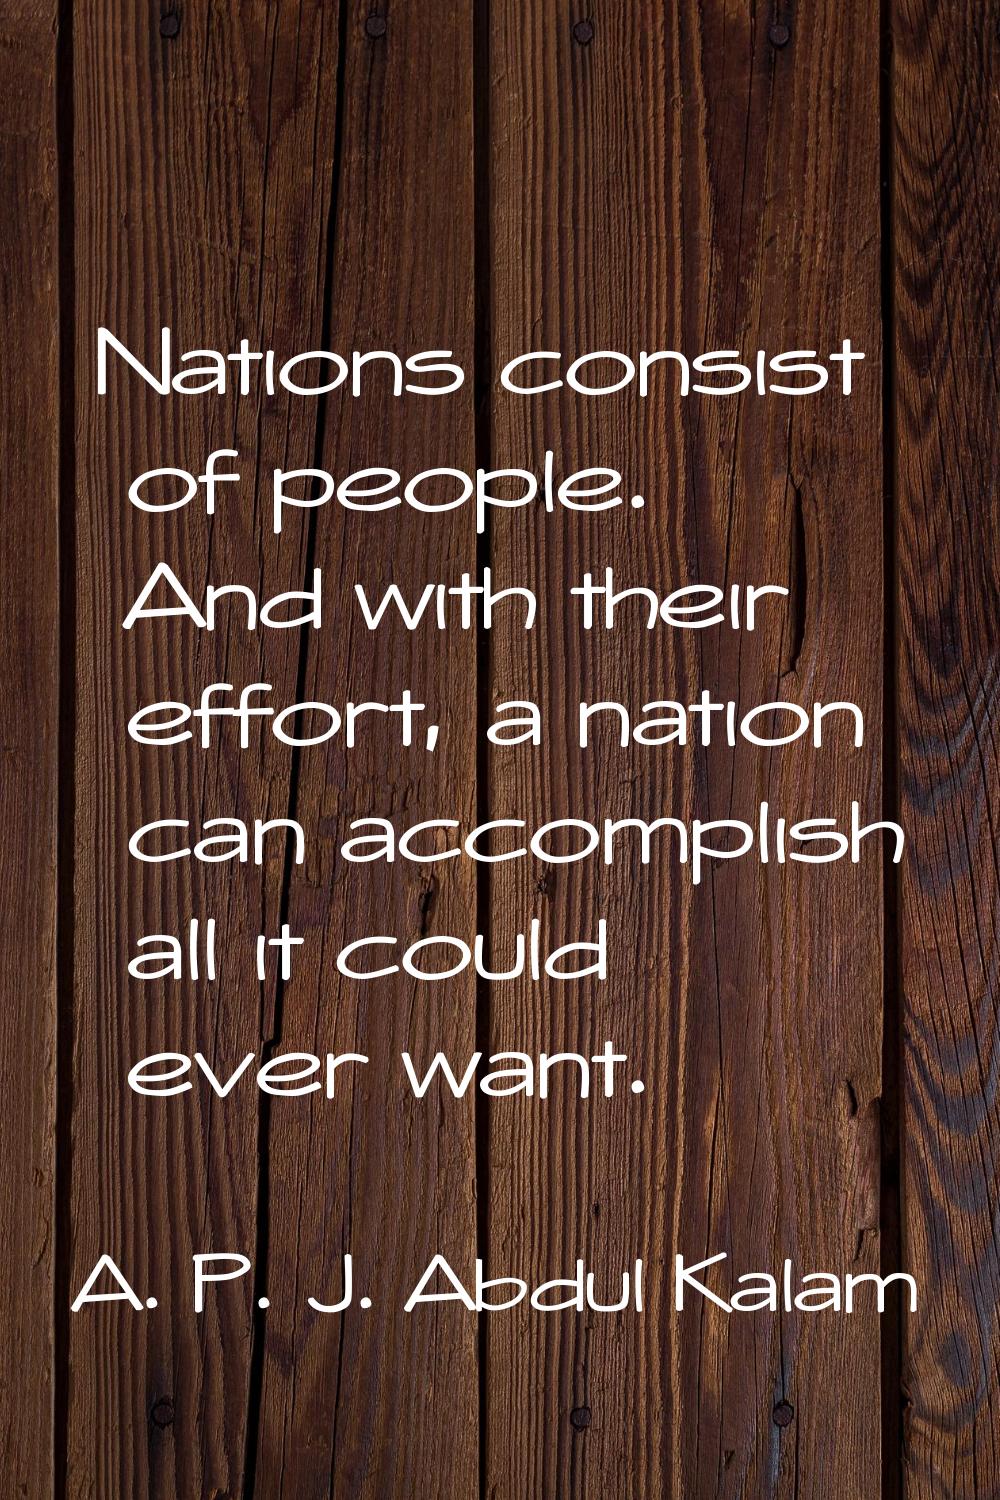 Nations consist of people. And with their effort, a nation can accomplish all it could ever want.